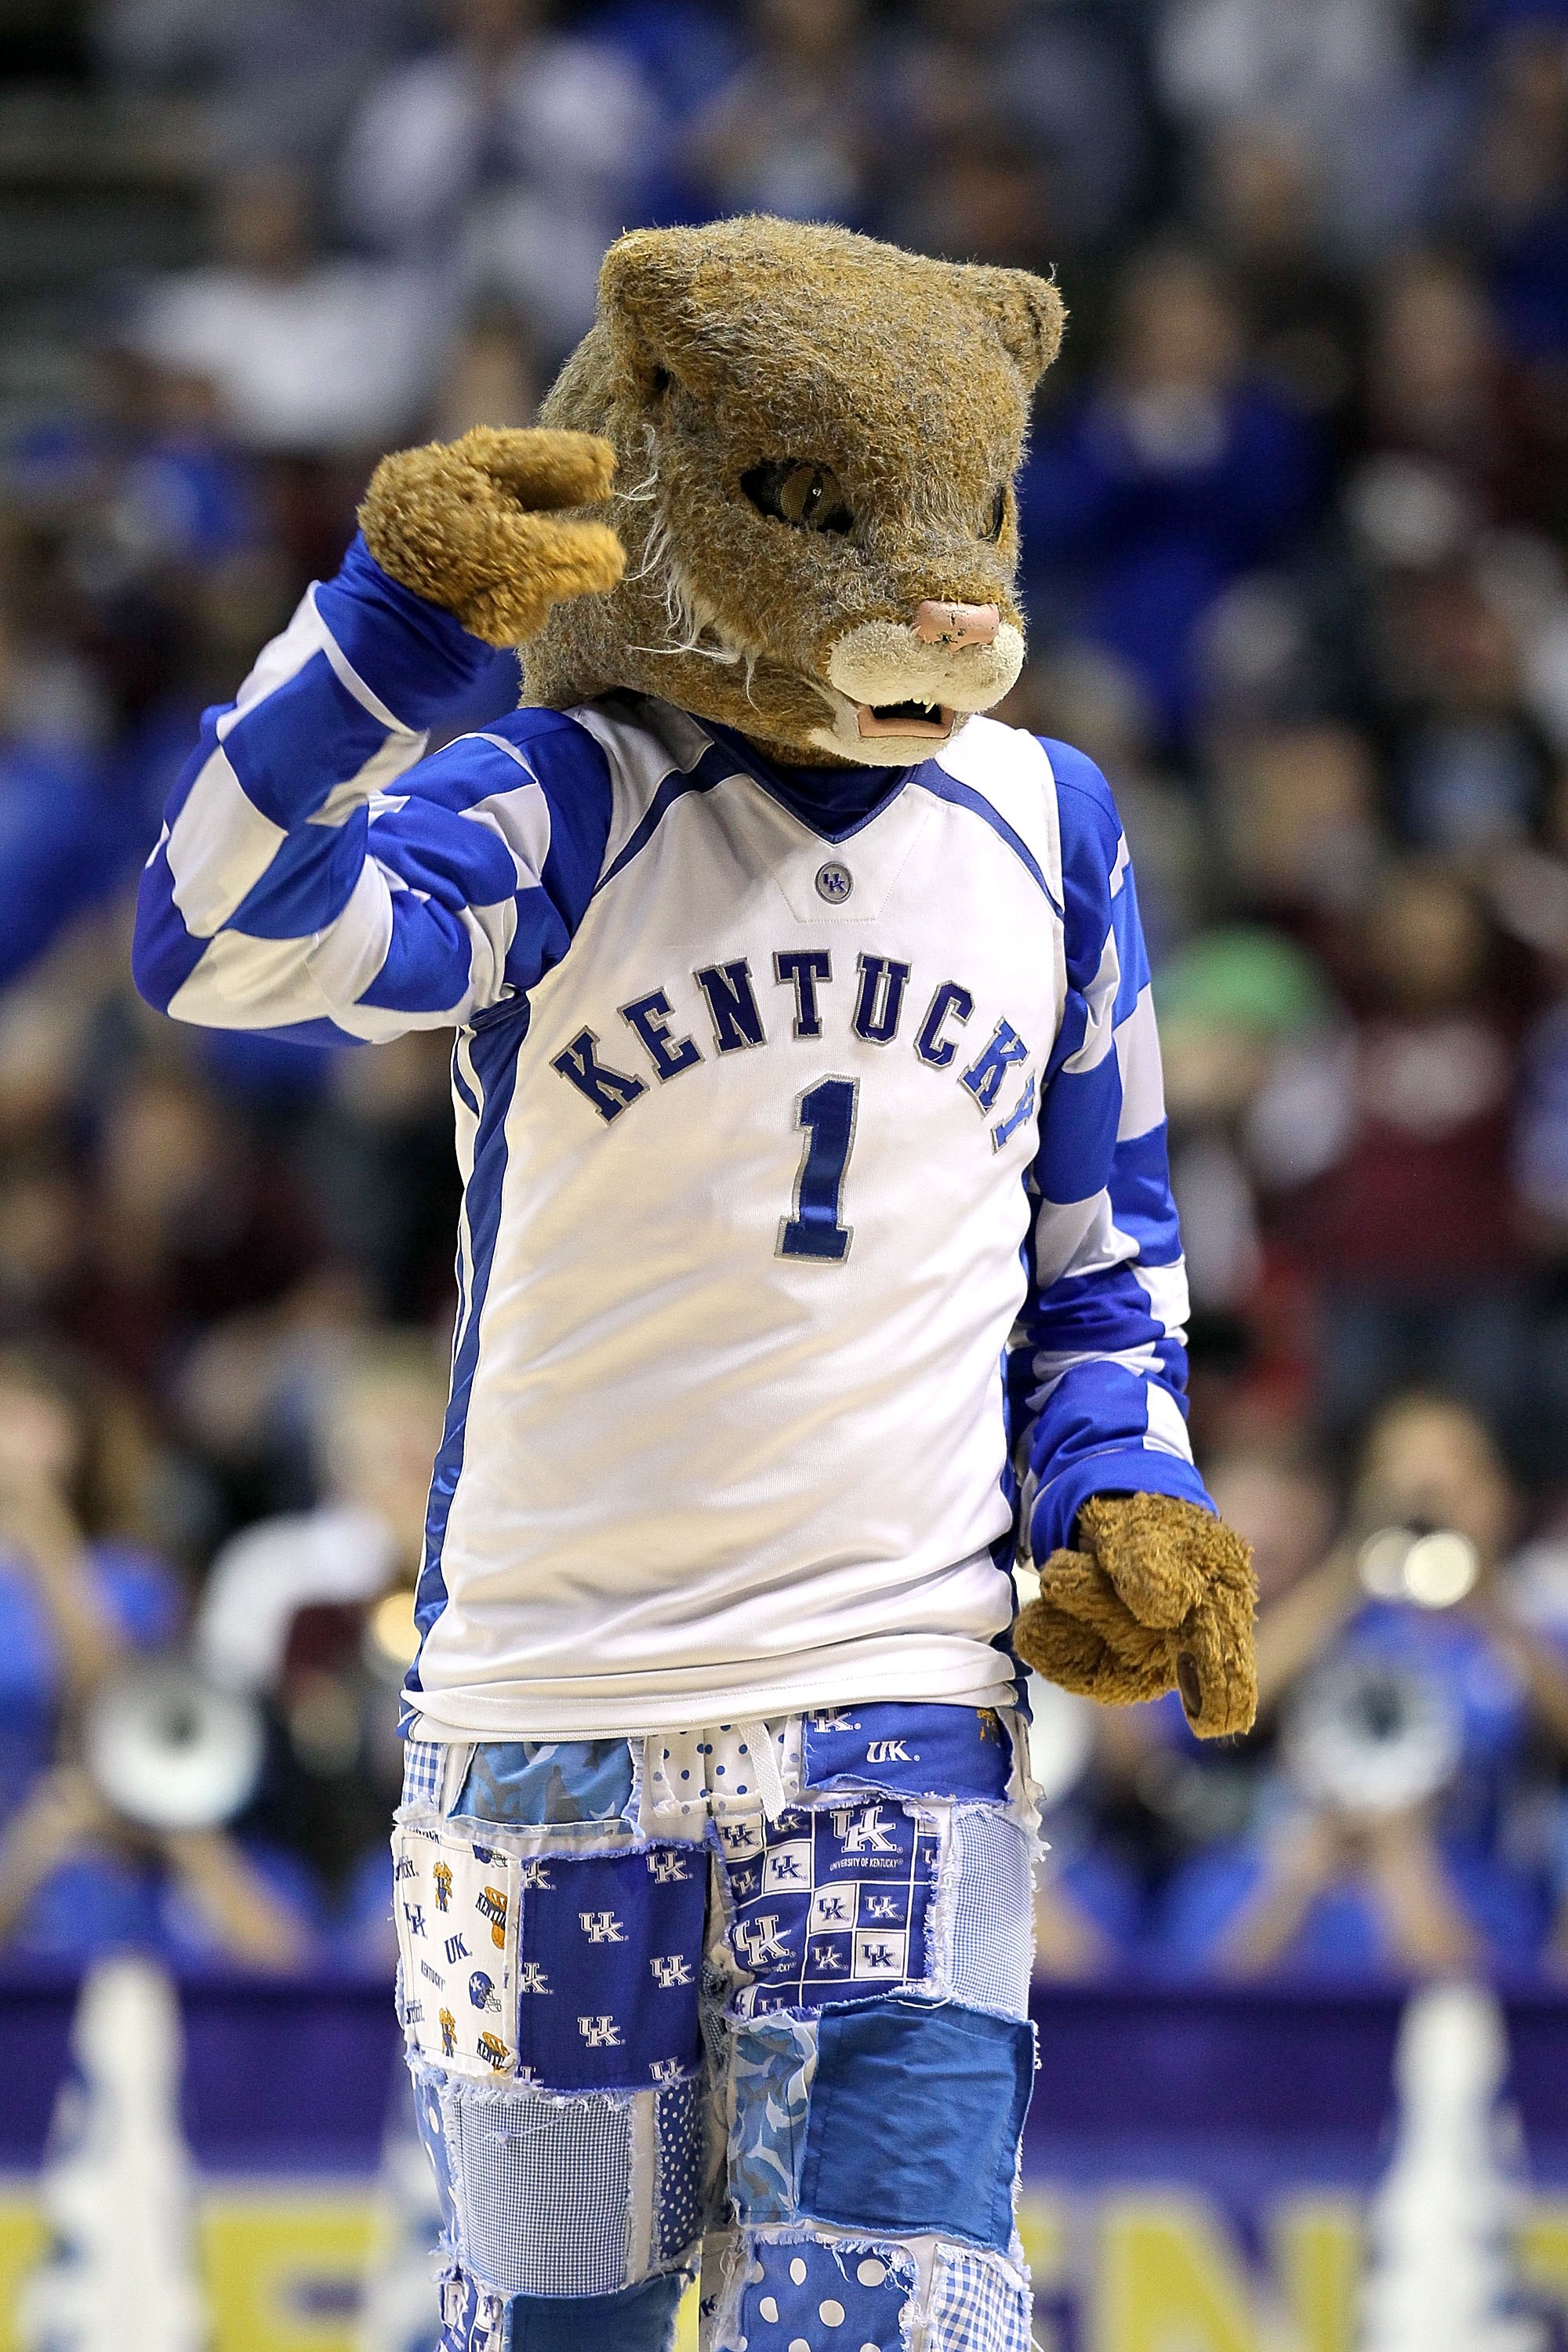 NASHVILLE, TN - MARCH 14:  The Wildcat, mascot for the Kentucky Wildcats performs against the Mississippi State Bulldogs during the final of the SEC Men's Basketball Tournament at the Bridgestone Arena on March 14, 2010 in Nashville, Tennessee.  (Photo by